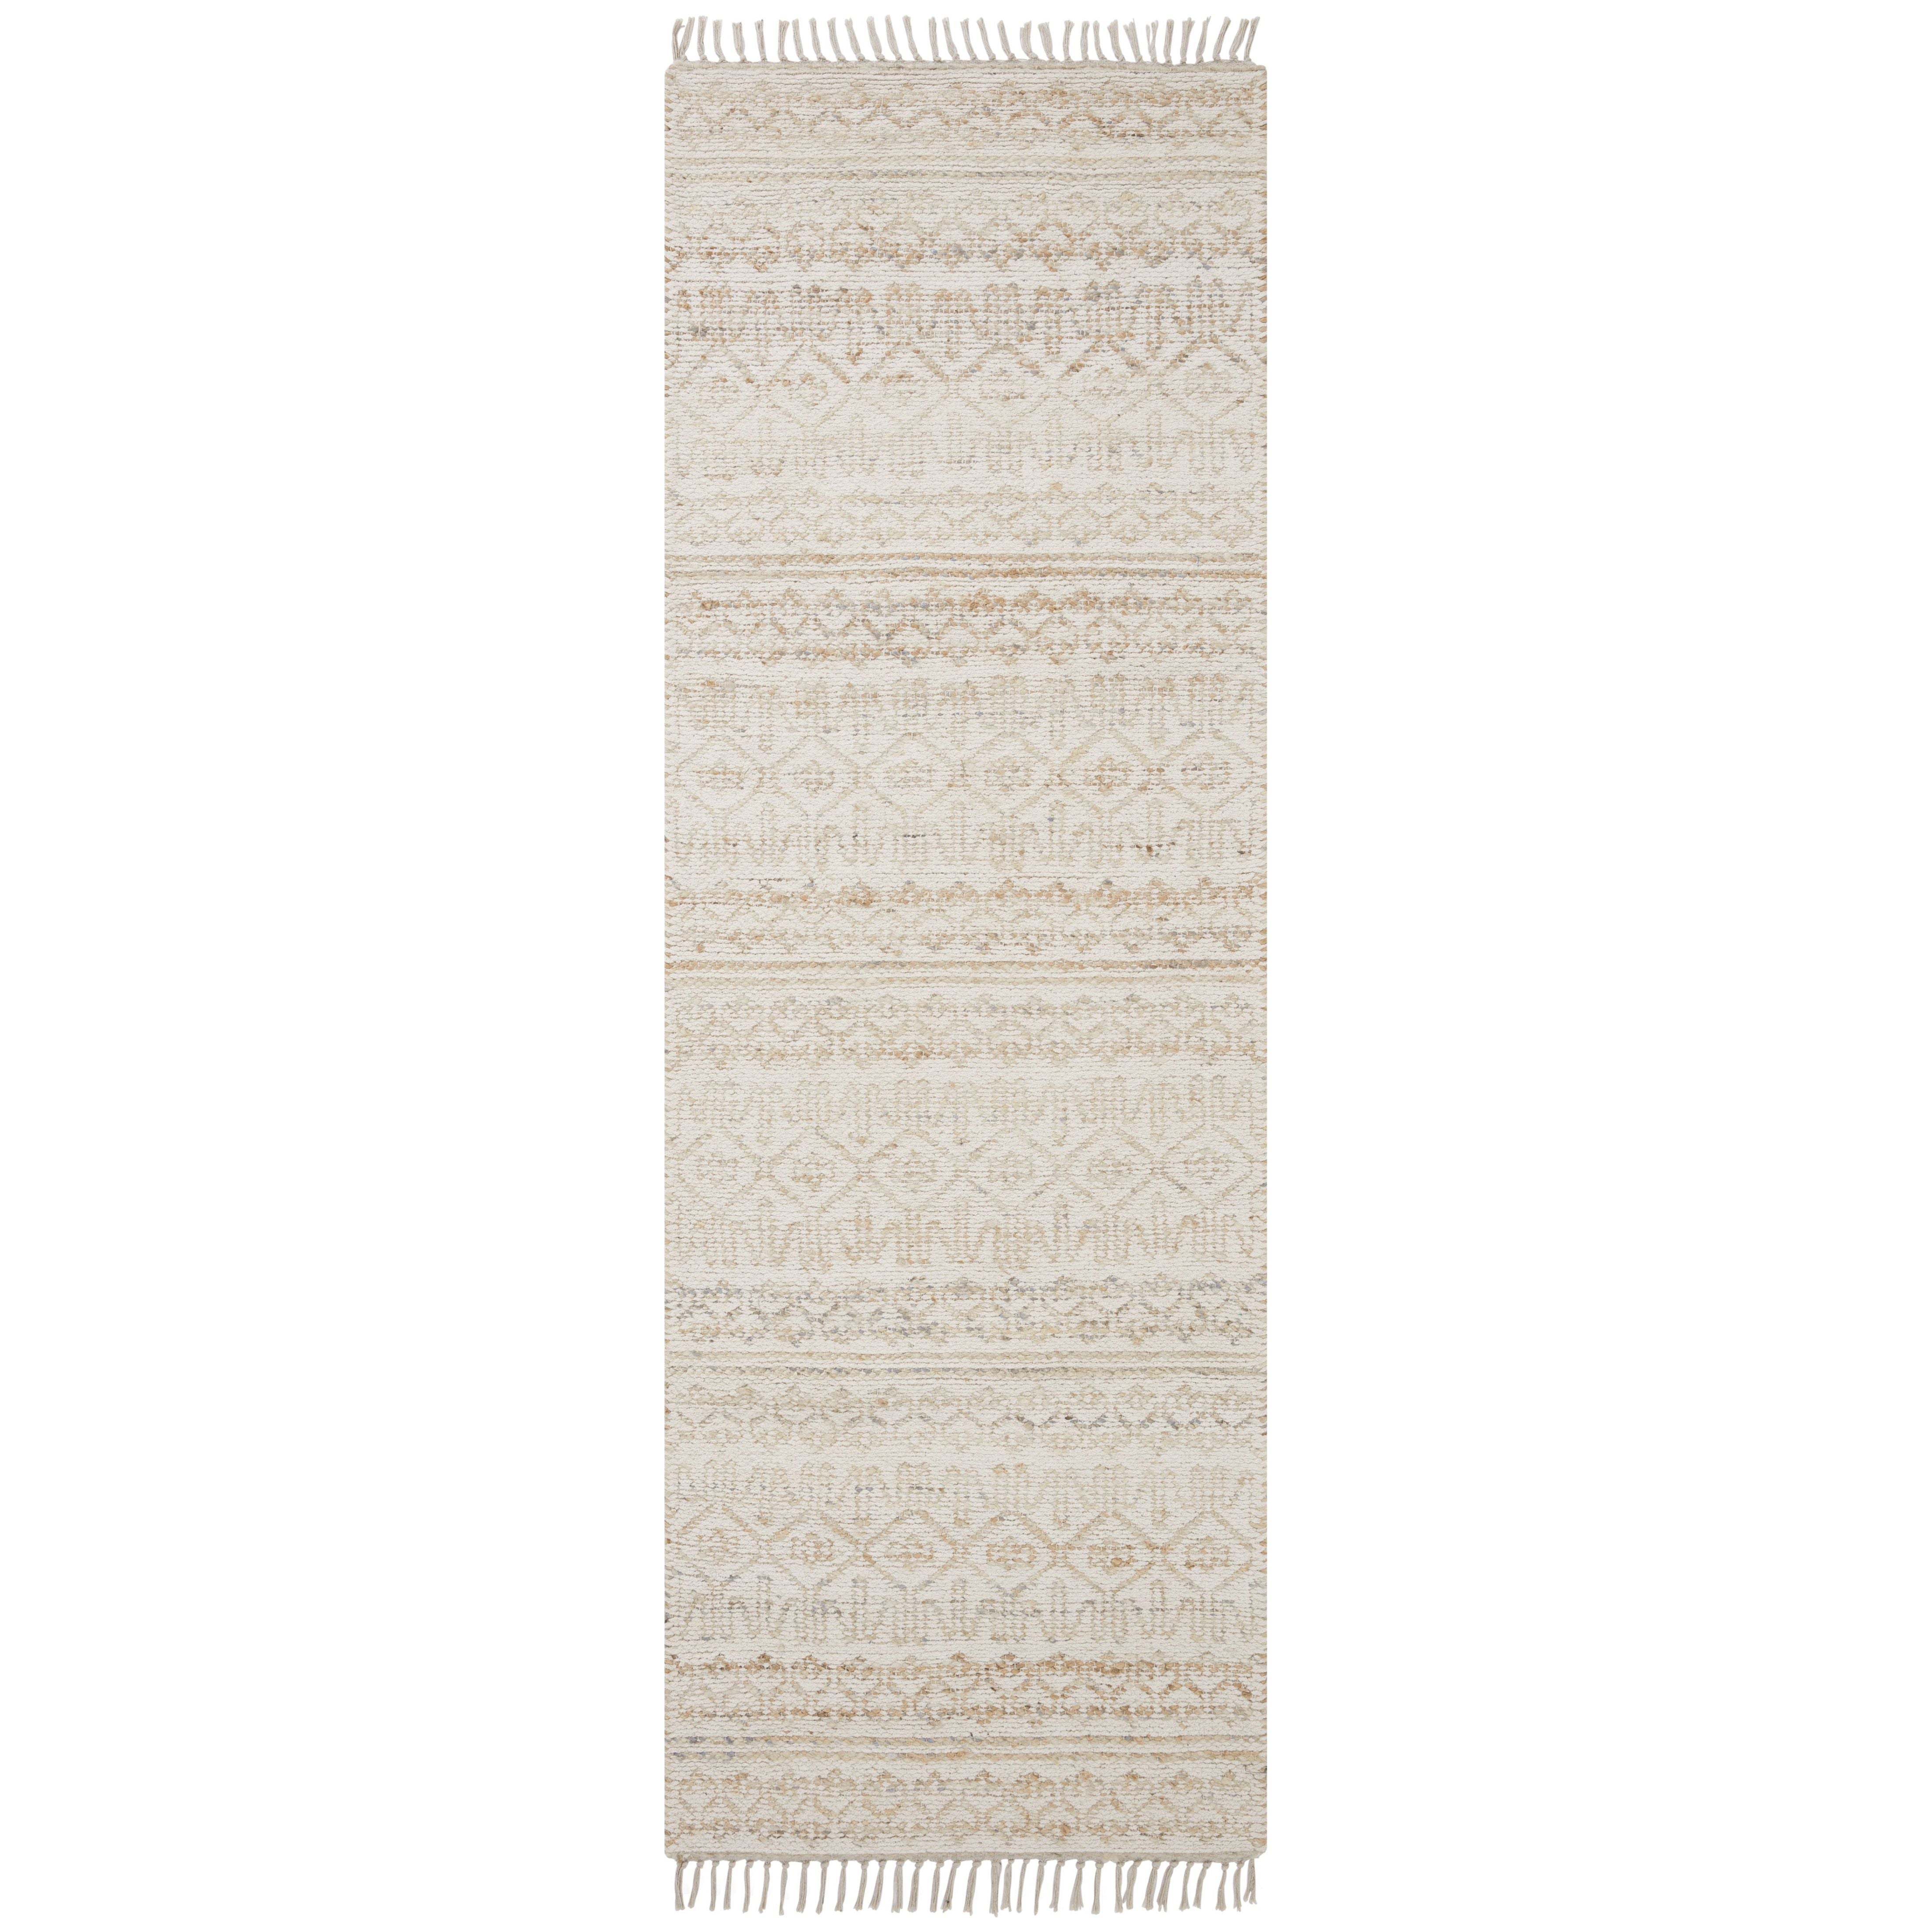 The Rivers Collection by Angela Rose x Loloi is a modern flatweave area rug with a reversible design featuring symmetrical motifs. Woven of wool, cotton, and jute, Rivers combines natural materials with an airy, natural aesthetic. The soft colors of the rug create a watercolor effect that adds artful depth to the neutral palette. Amethyst Home provides interior design, new home construction design consulting, vintage area rugs, and lighting in the Des Moines metro area.